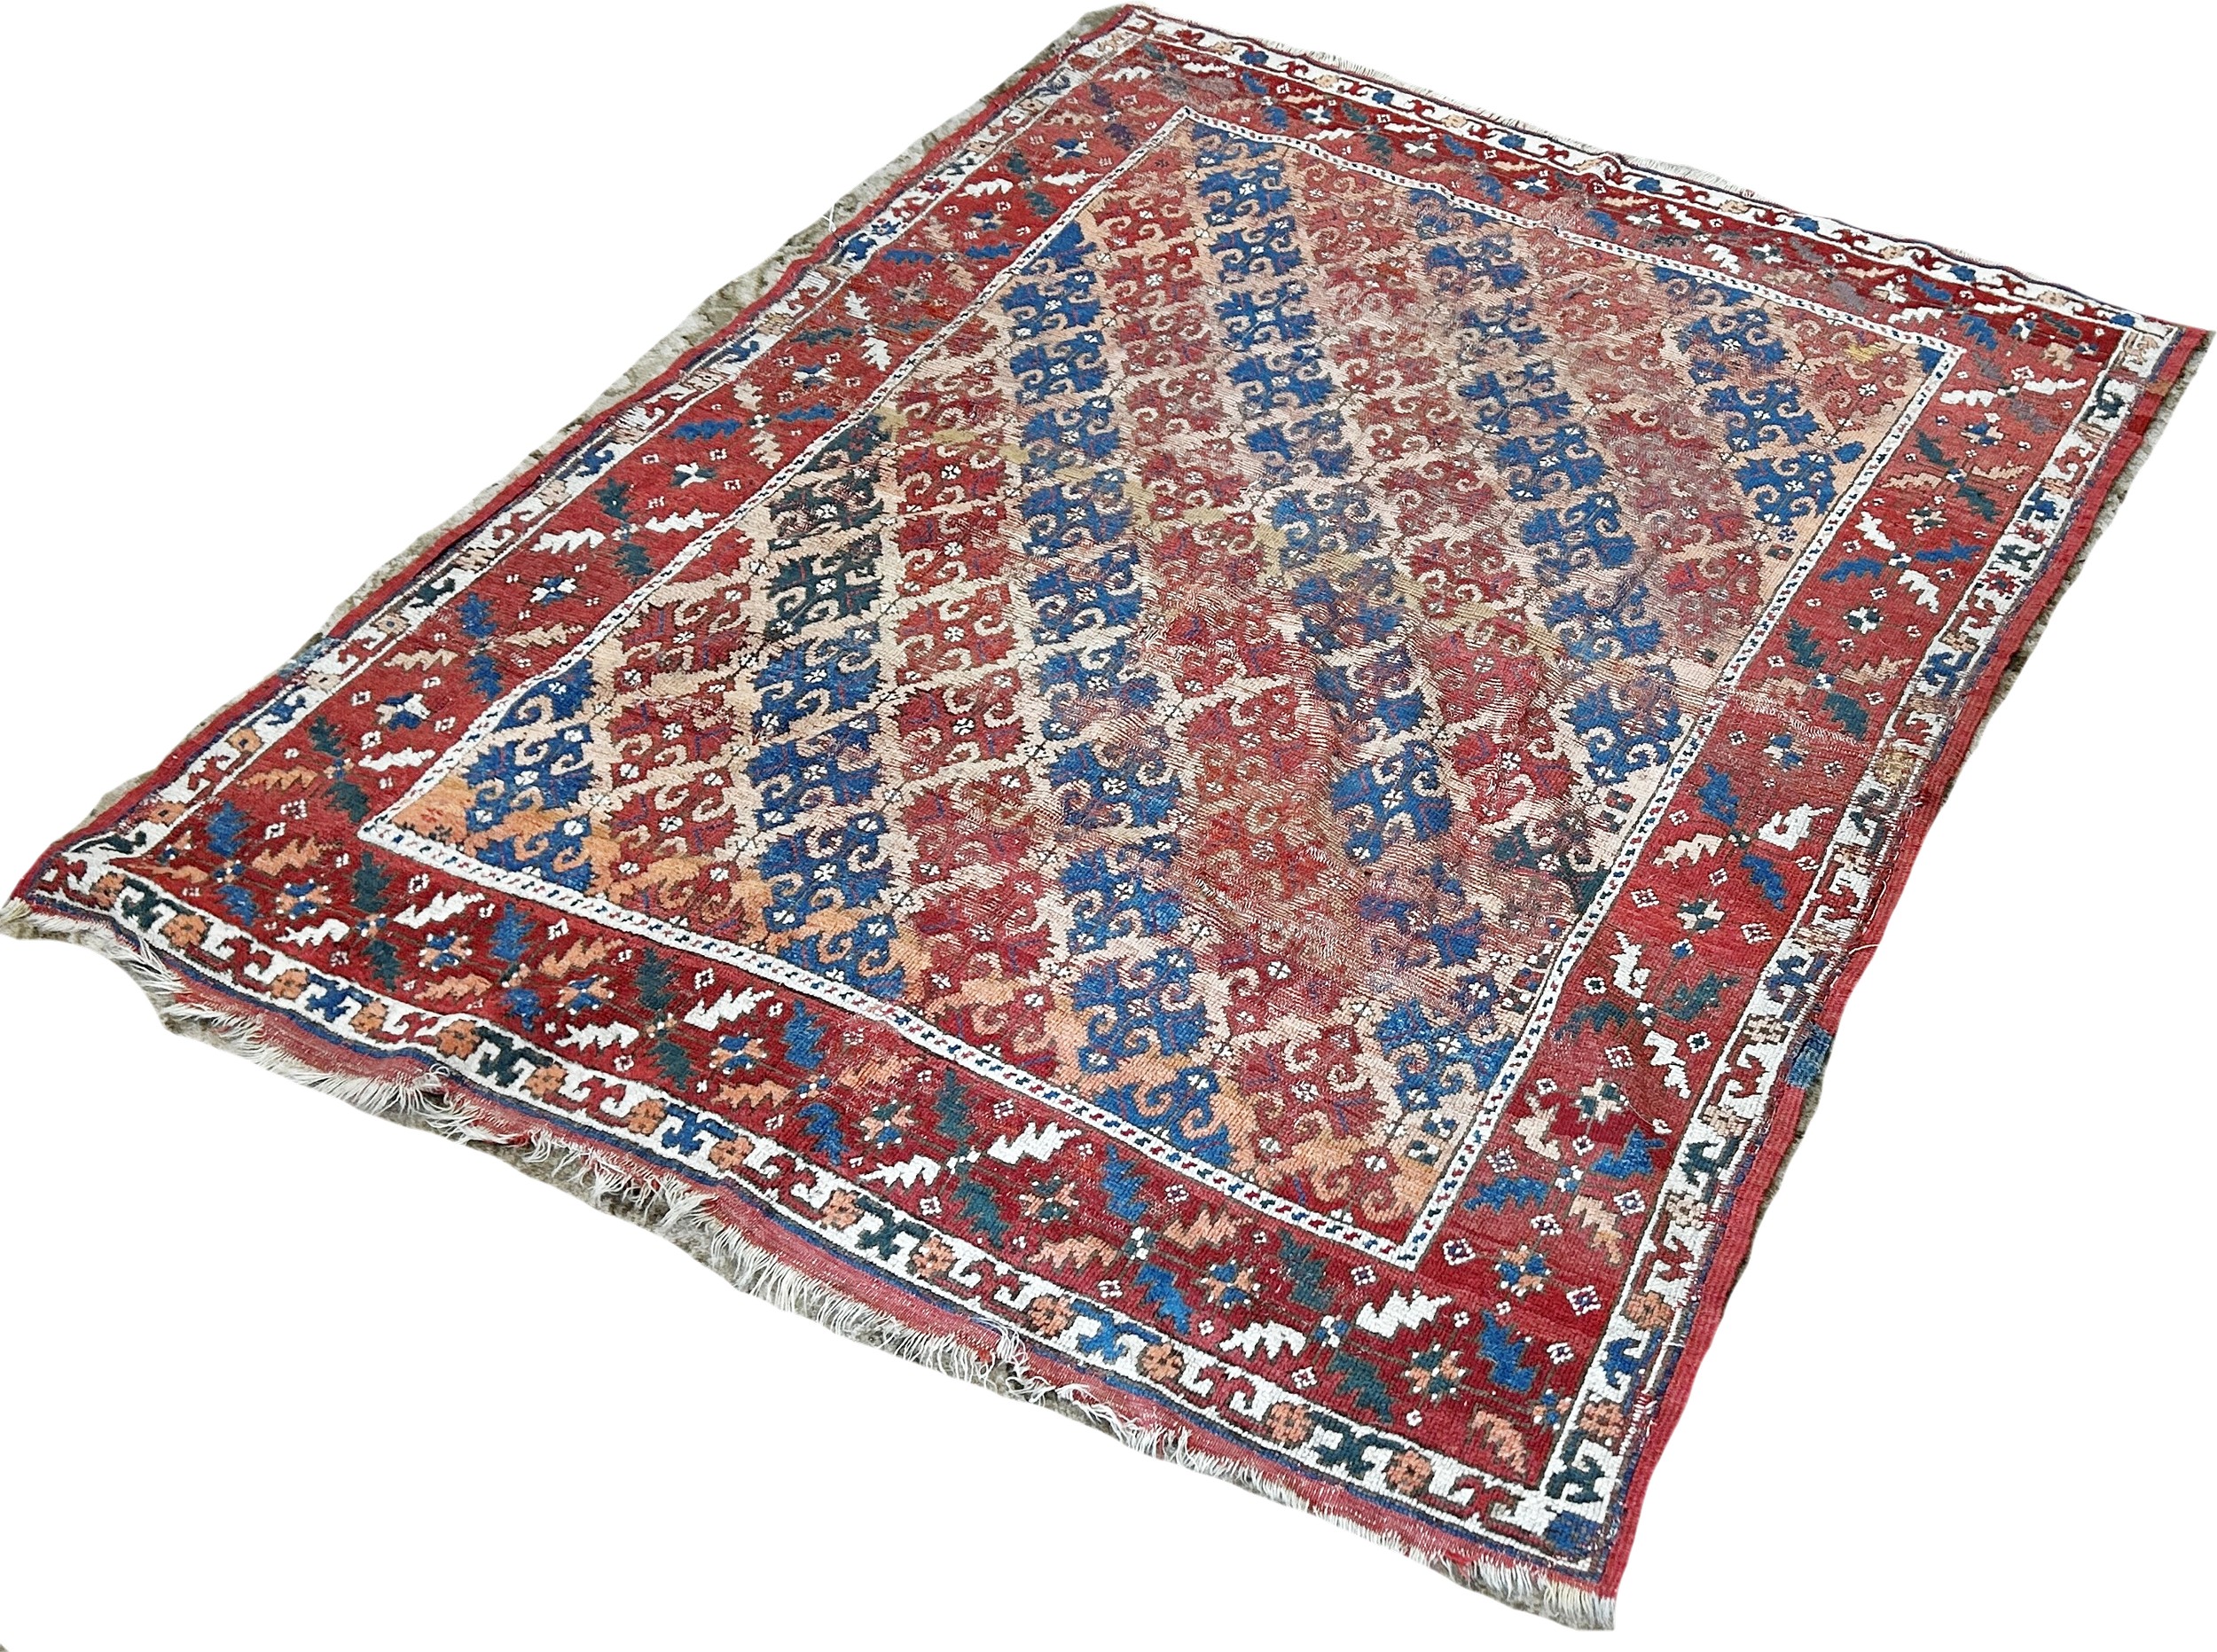 An old Persian rug with diagonal red and blue geometric patterns, worn in places, 163cm x 136cm - Image 3 of 3